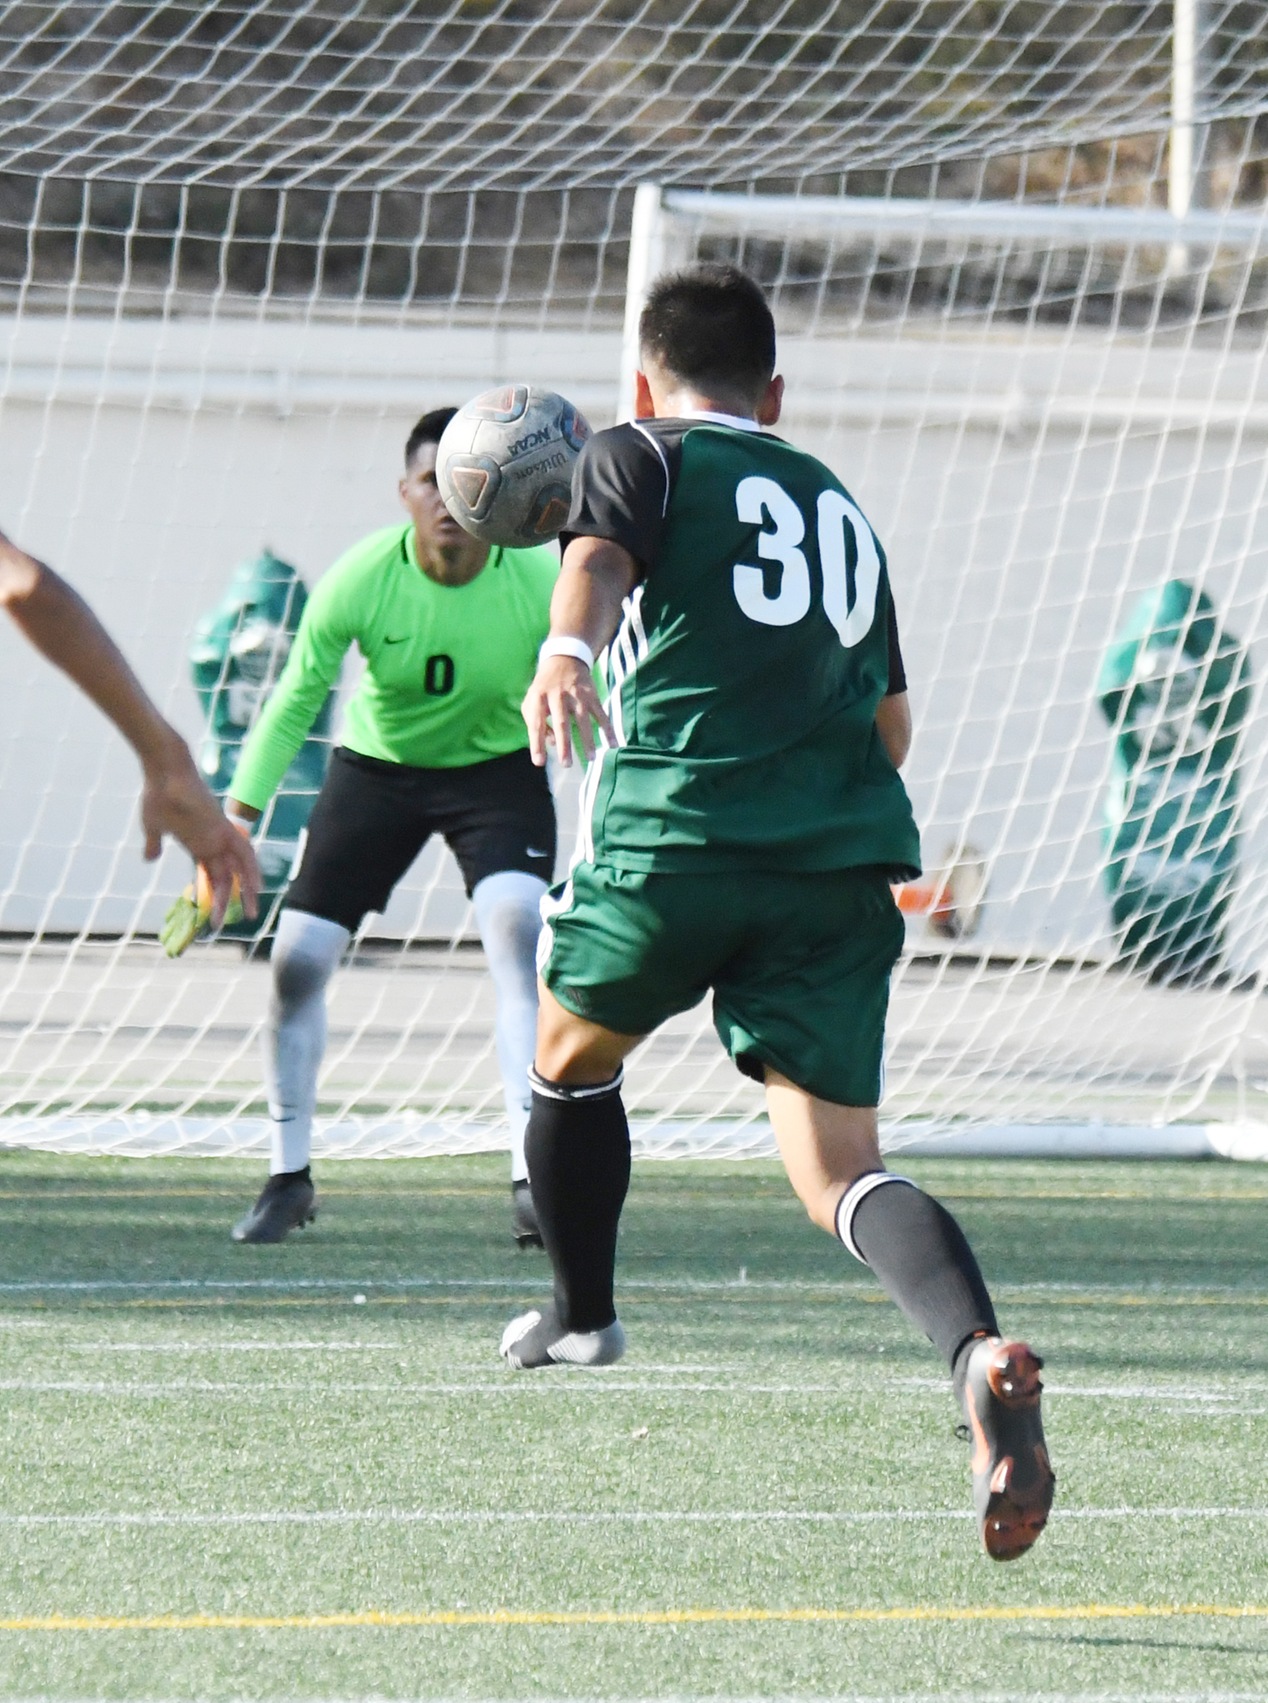 East L.A. College forward Paulo Macedo Nakashigue will take this assist from Alexis Arroyo (not pictured) and score without his left shoe which fell off at midfield in a 1-0 win over Rio Hondo College. (Photo by DeeDee Jackson)